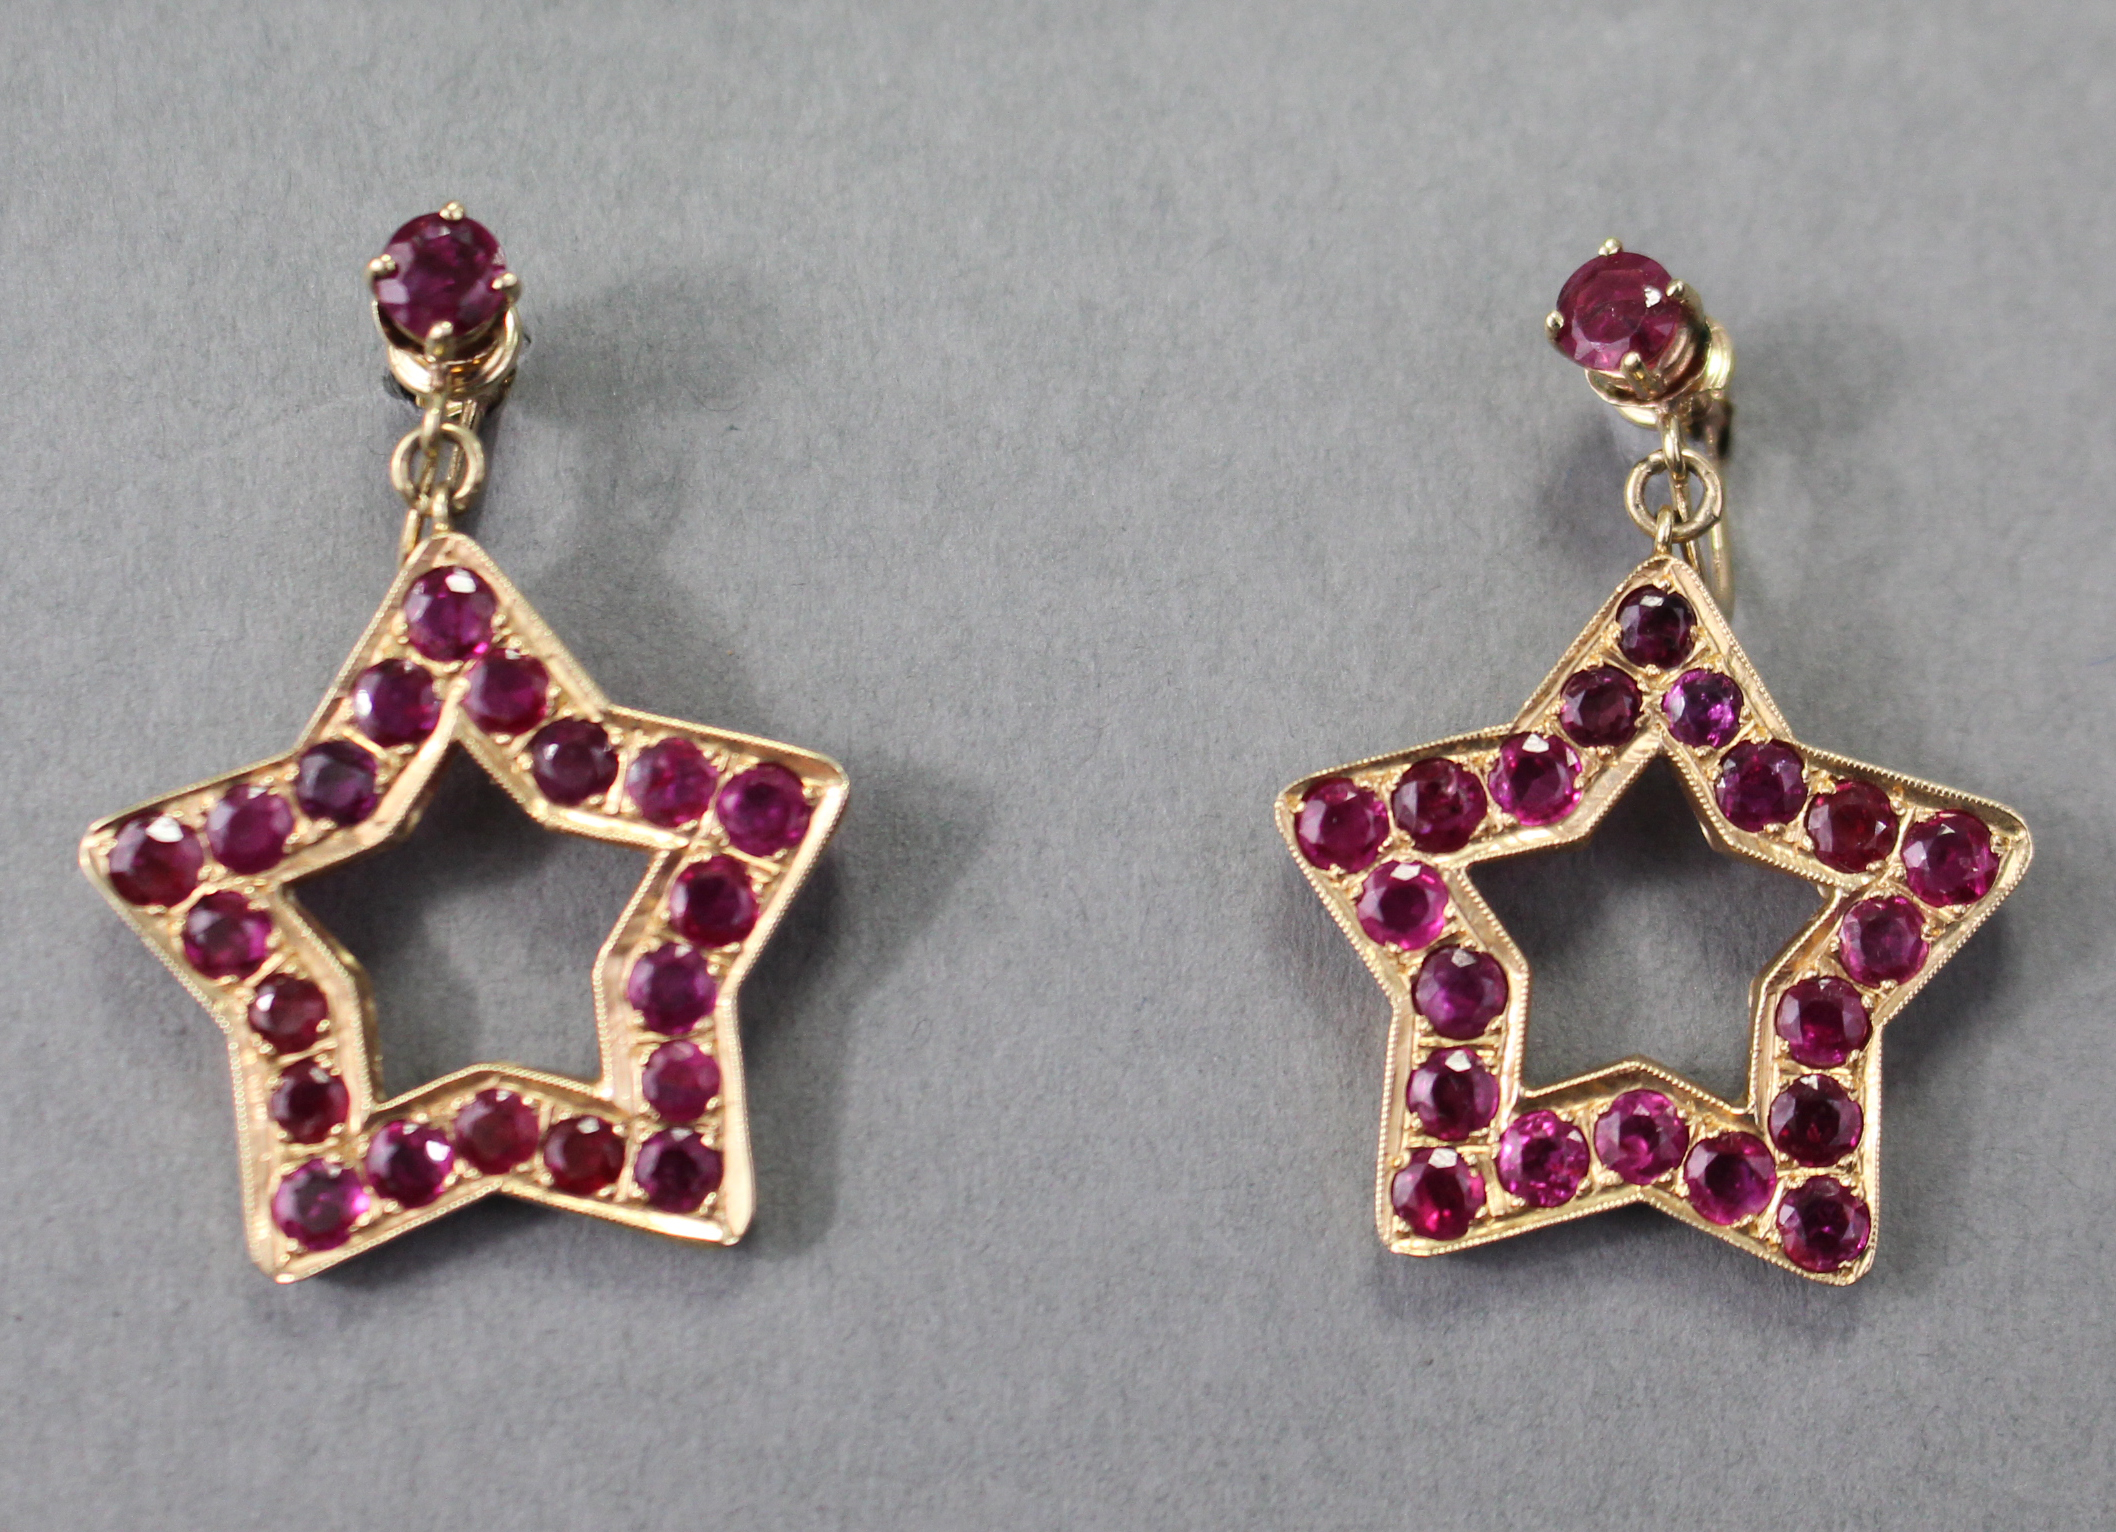 A PAIR OF RUBY PENDANT EARRINGS, each of open five-pointed star shape set twenty round-cut stones of